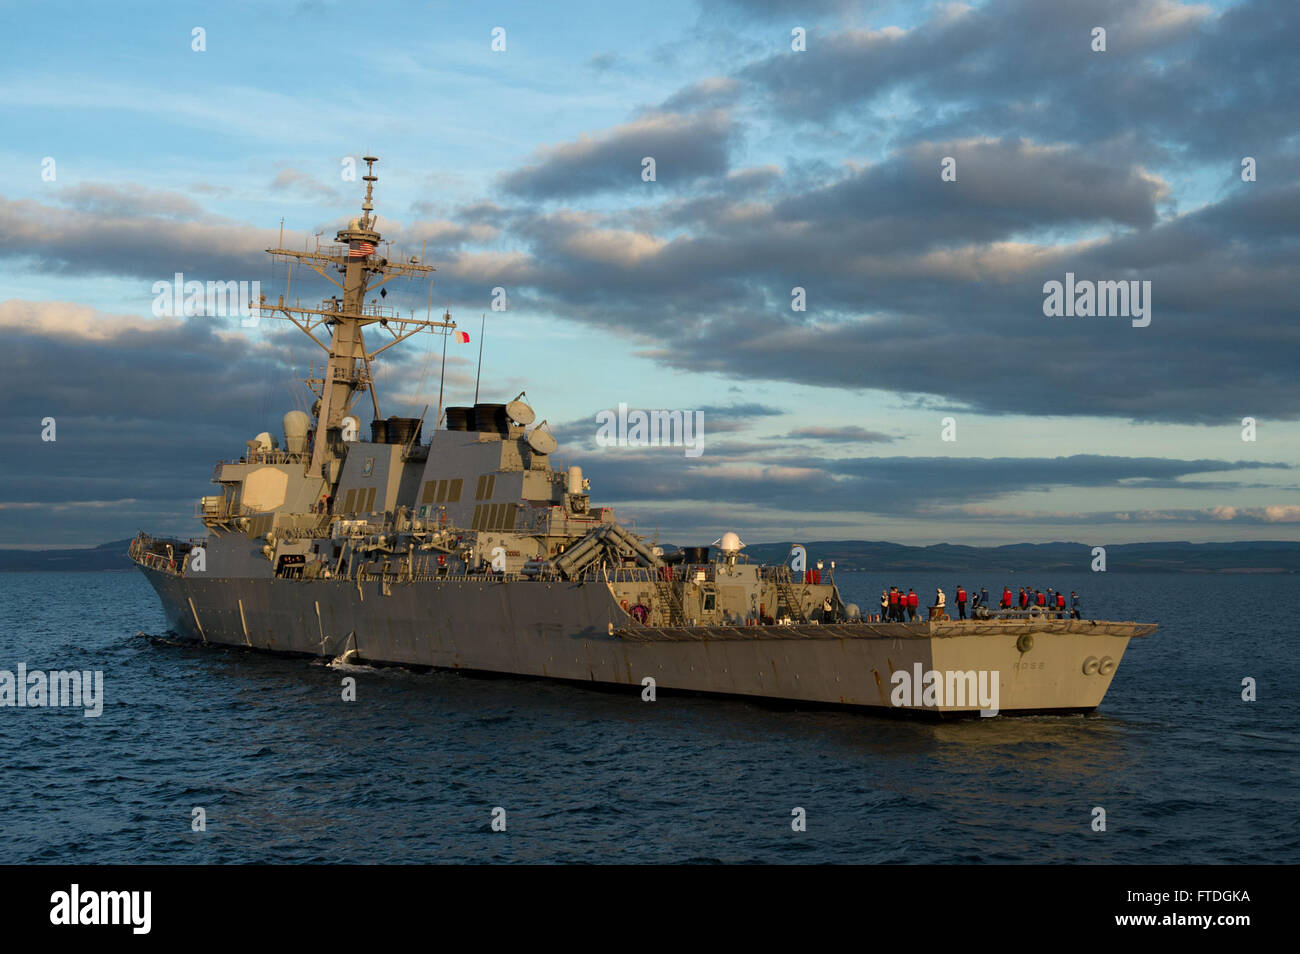 151018-N-XT273-061 ATLANTIC OCEAN (Oct. 18, 2015)  The Arleigh Burke-class guided missile destroyer USS Ross (DDG 71) takes part in a ship formation to begin At Sea Demonstration 2015 (ASD 15) Oct. 18, 2015. ASD15, conducted under the auspices of the Maritime Theater Missile Defense (MTMD) Forum, is intended to assess and evaluate network interoperability between participating units. (U.S. Navy photo by Mass Communication Specialist 2nd Class Justin Stumberg/Released) Stock Photo